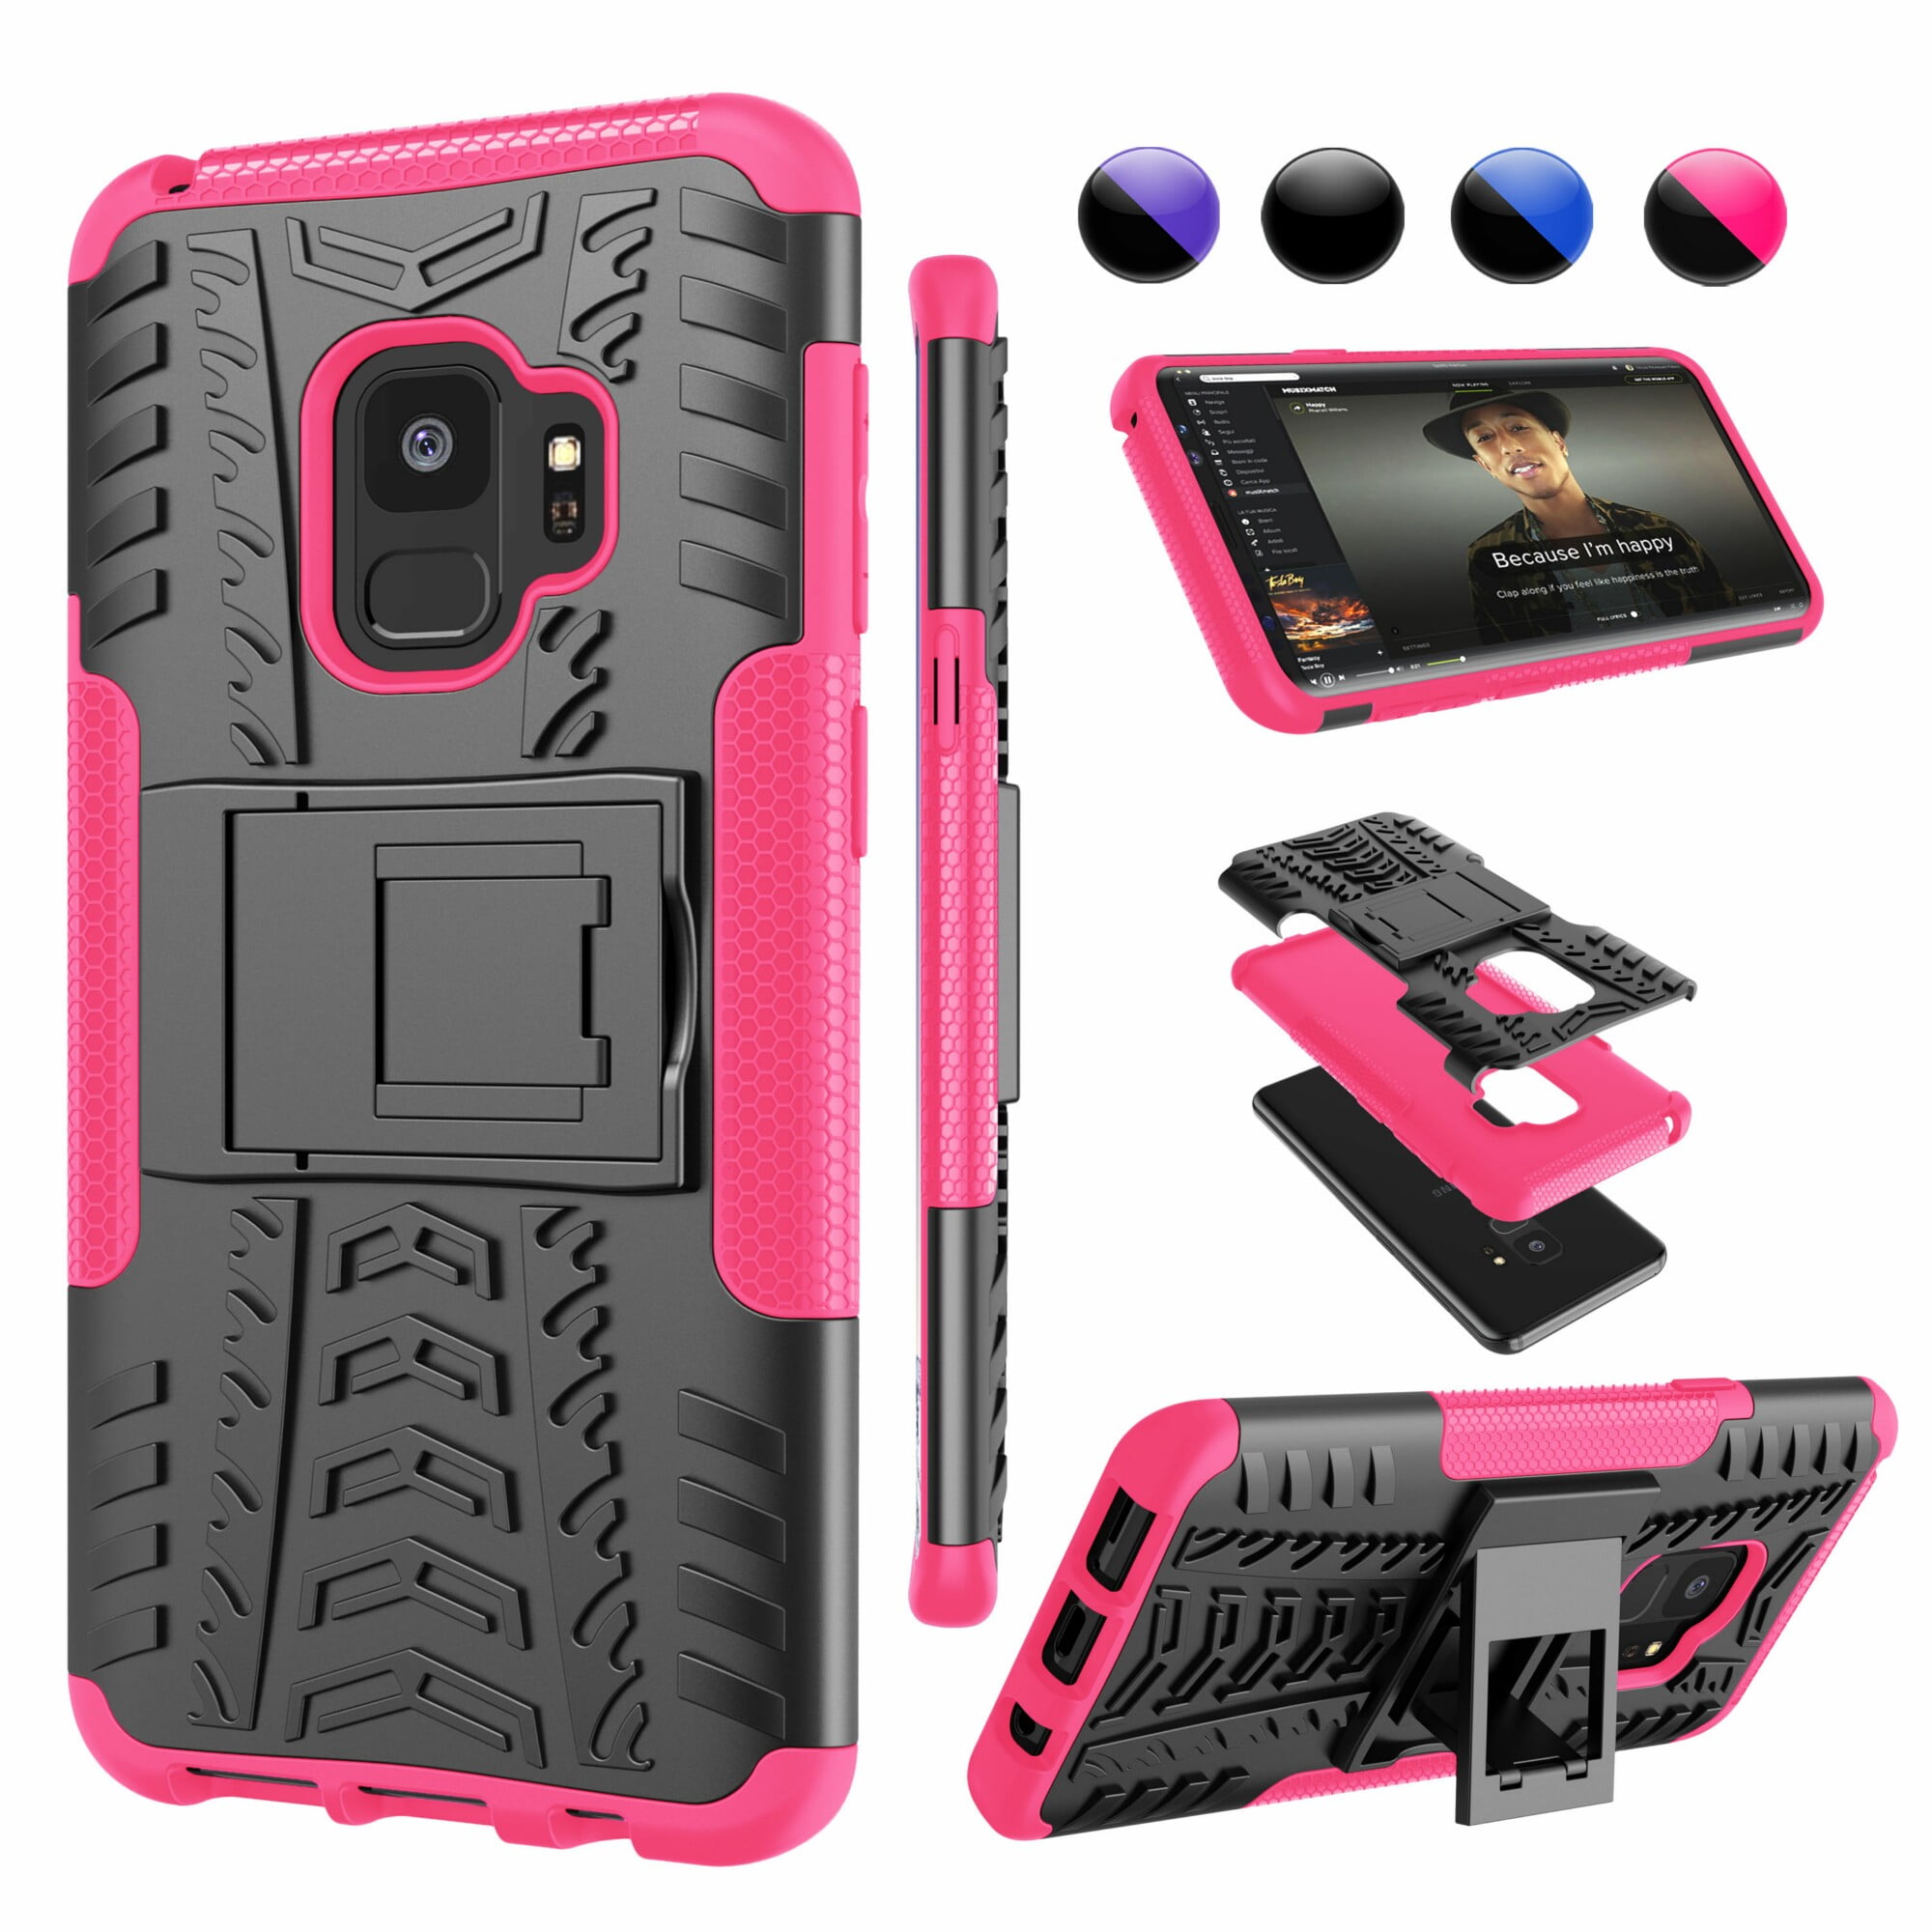 Samsung S9 Galaxy S9 Case with Stand, S9 Cover, SM-G960 Cover, Njjex Hybrid [Kickstand][Non-slip] Full-body Rugged ShockProof Protection Case For Samsung -Hot Pink - Walmart.com